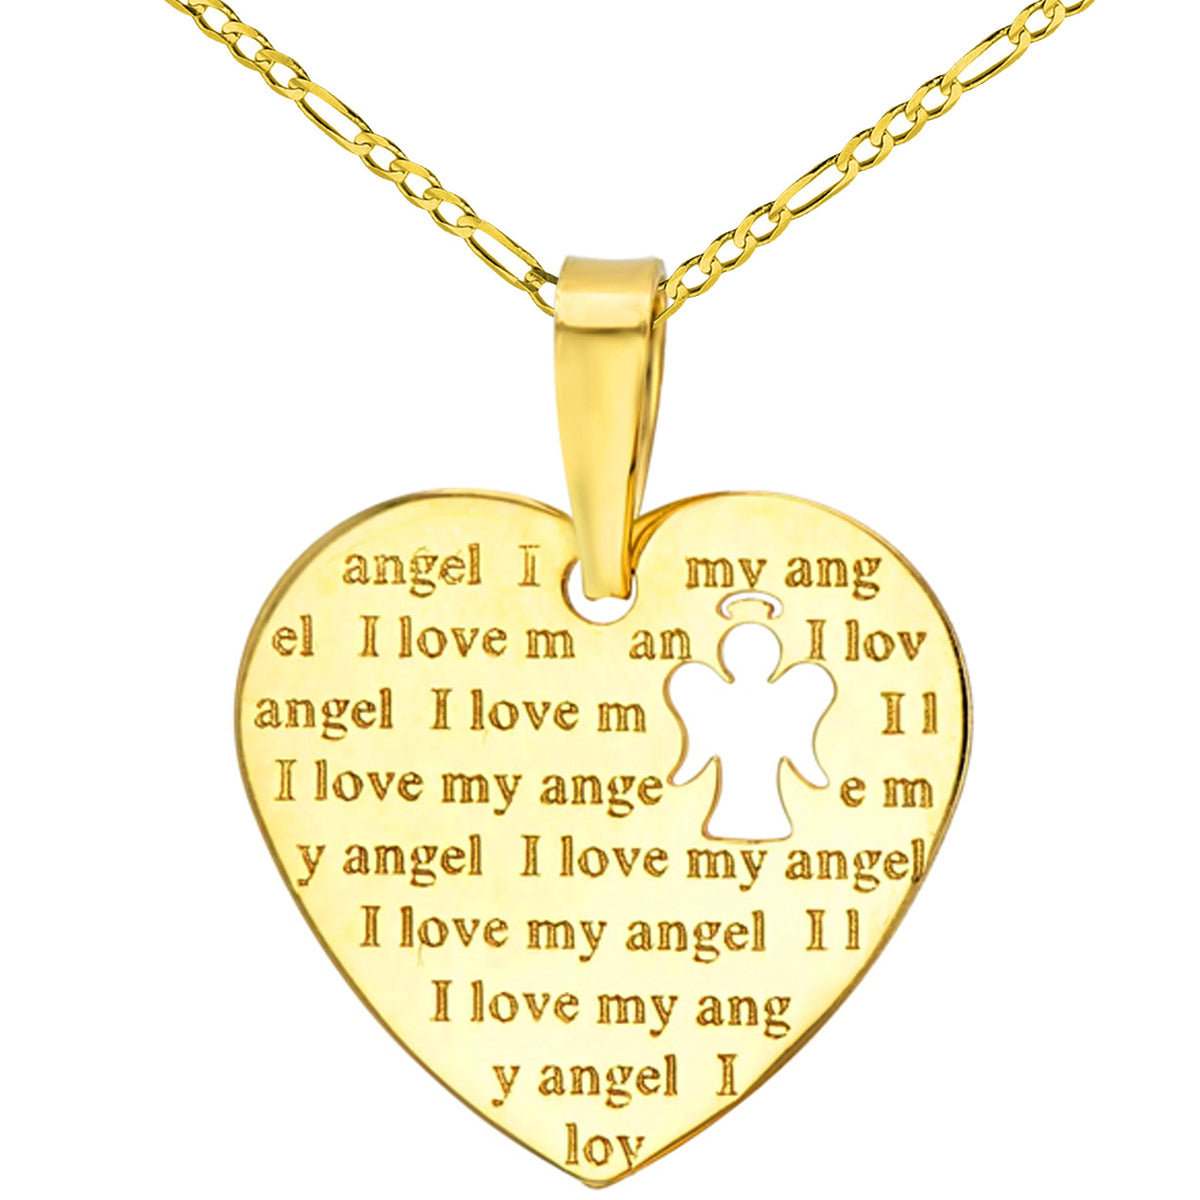 14K Yellow Gold Heart Charm with I Love My Angel Script Pendant Figaro Chain Necklace